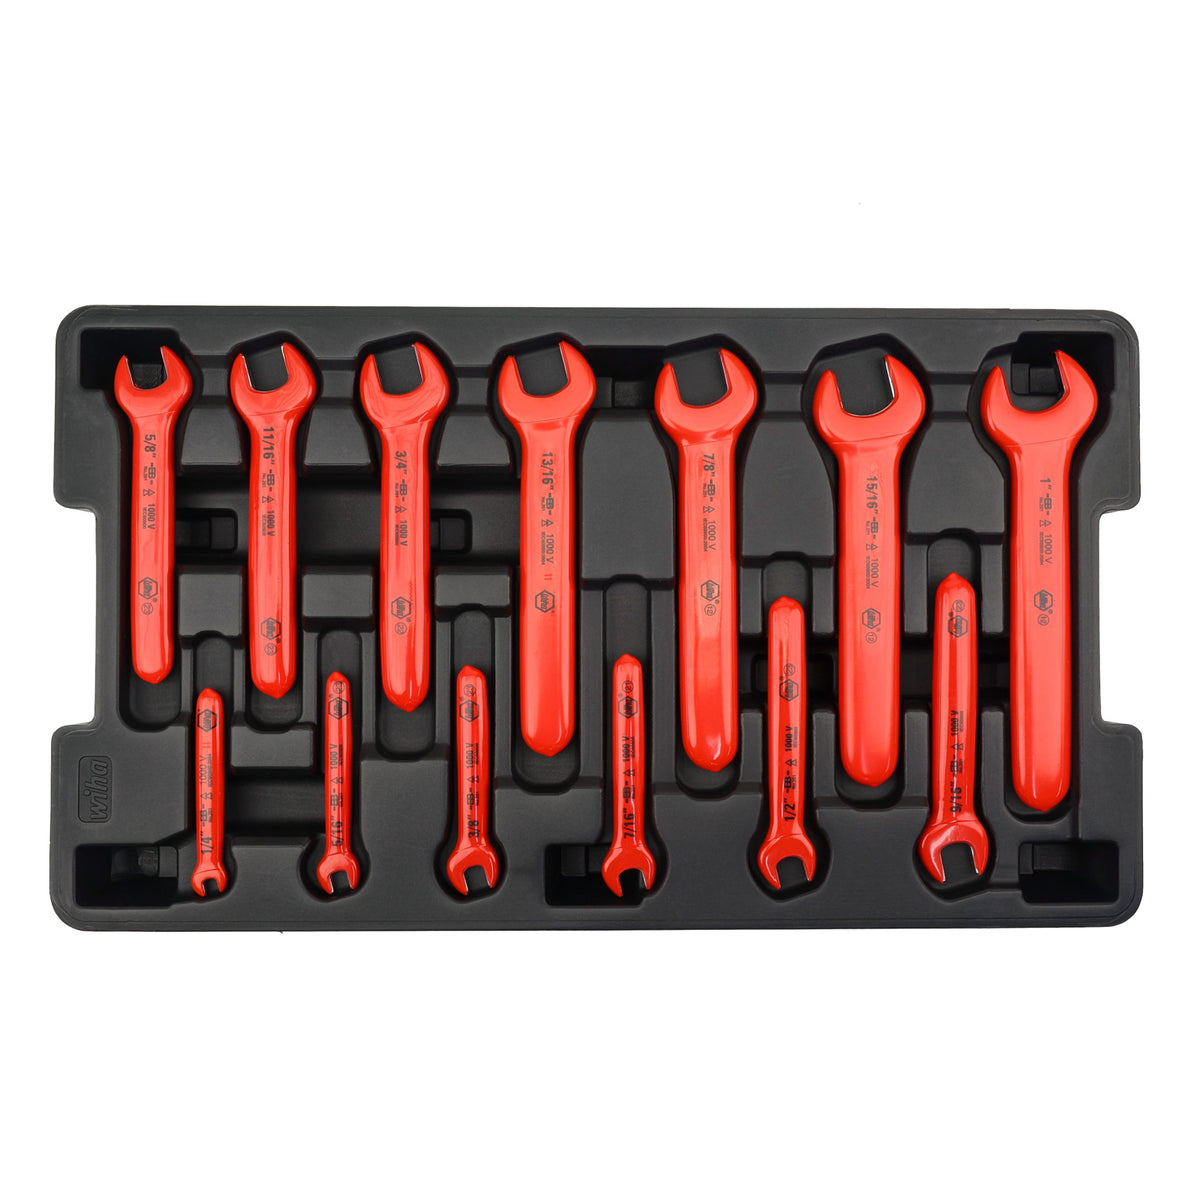 Wiha 20196 Insulated Open End MM Wrench Tray Set Made in Germany